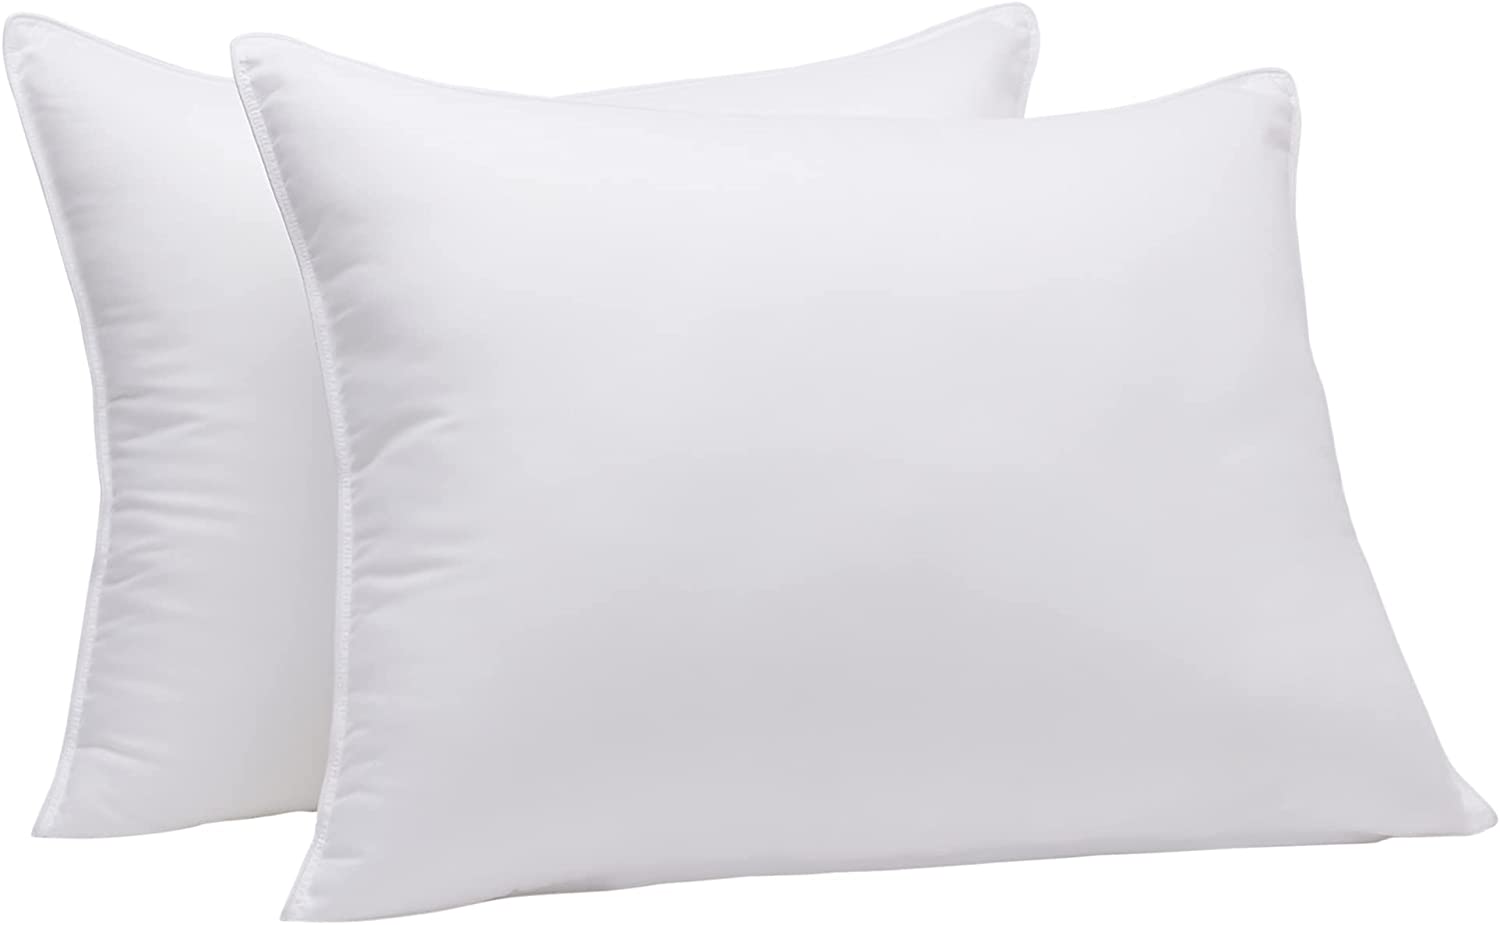 AmazonBasics Down Alternative Pillow For Stomach Sleepers, Set Of 8